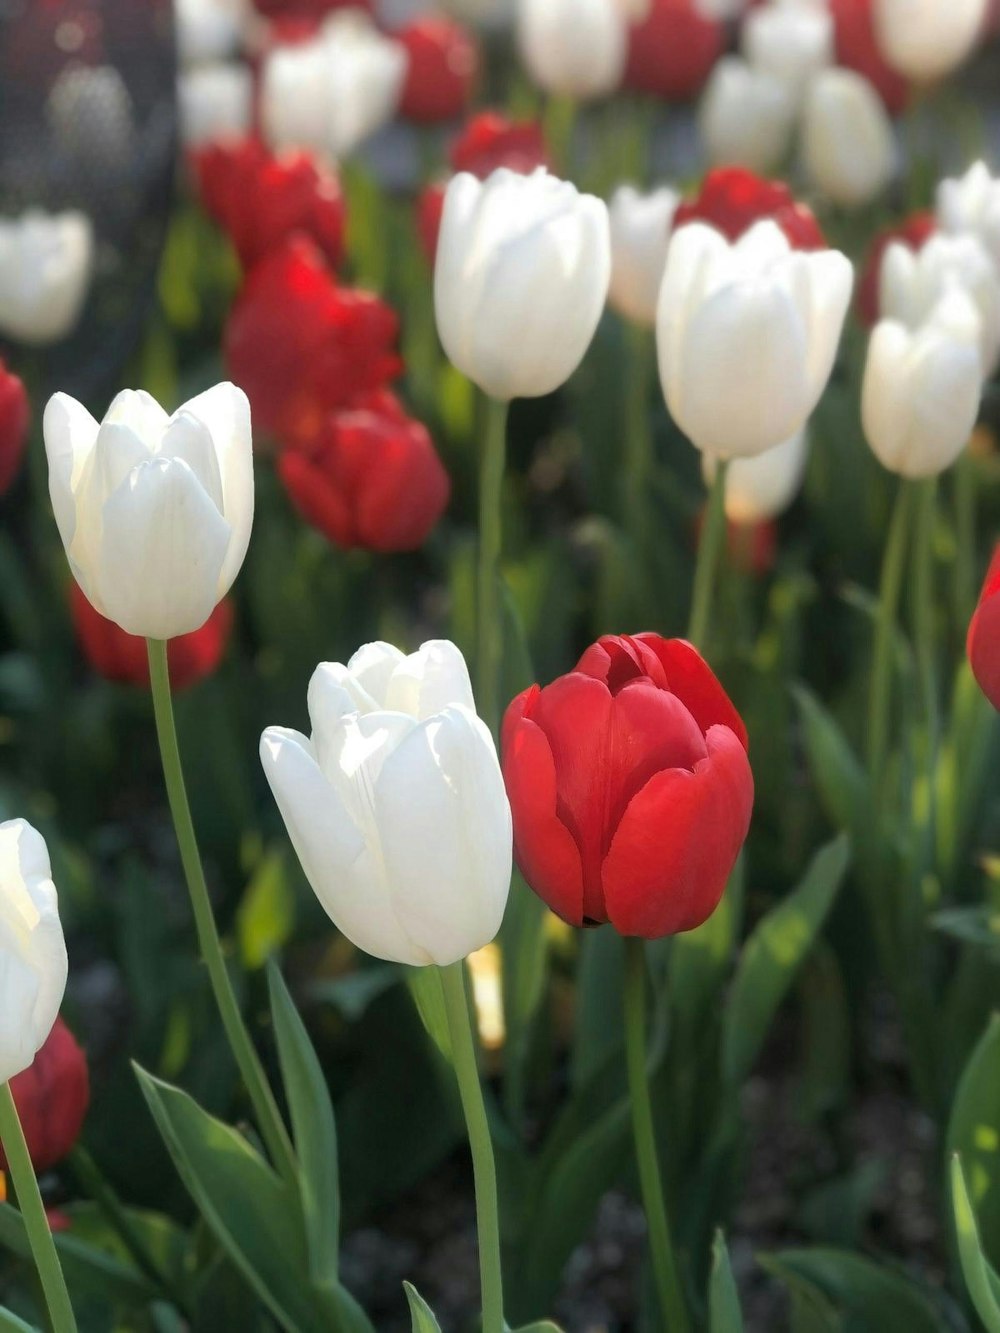 a bunch of red and white tulips in a garden